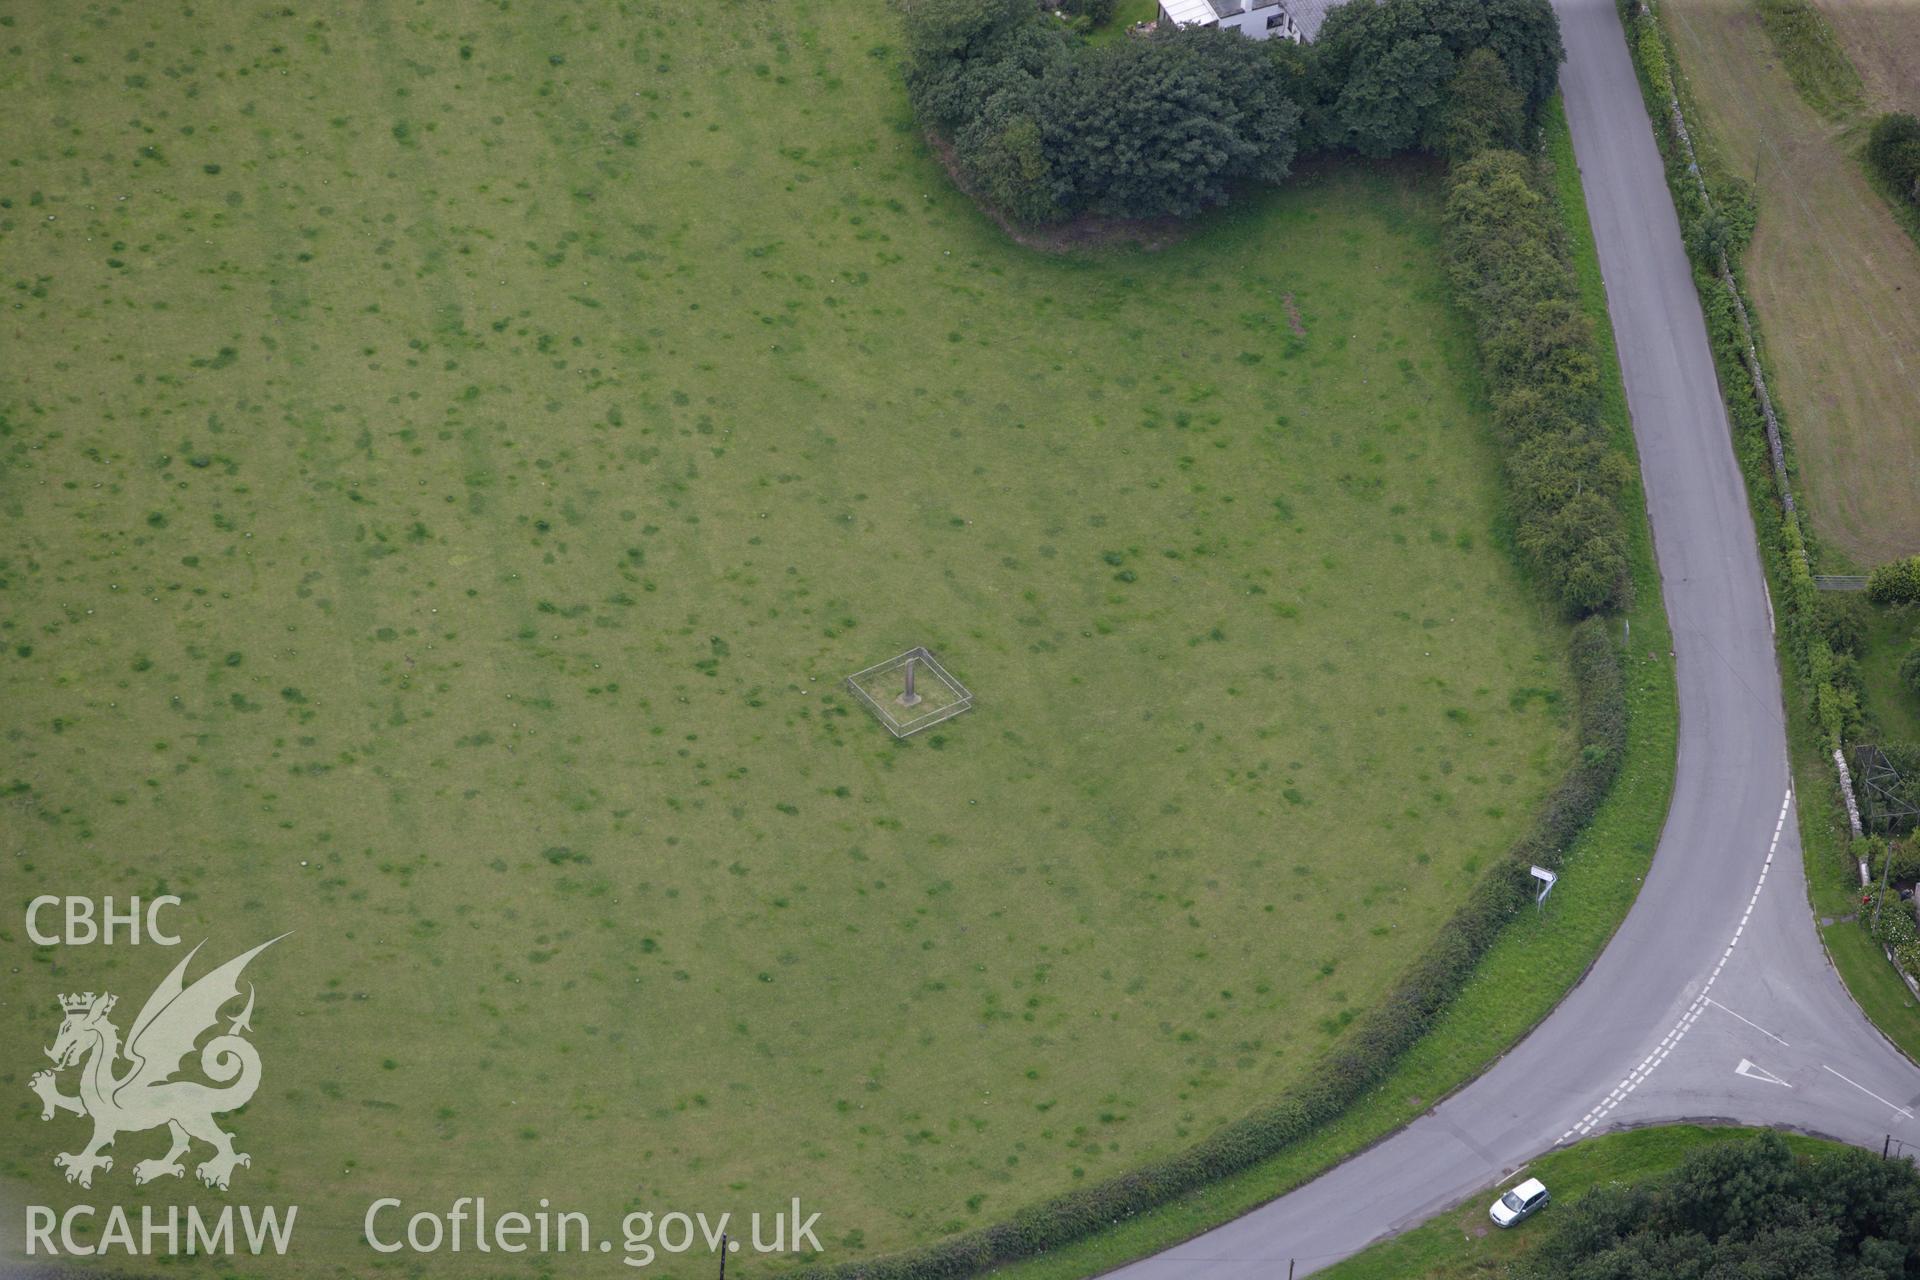 RCAHMW colour oblique aerial photograph of Maen Achwyfan Cross. Taken on 30 July 2009 by Toby Driver